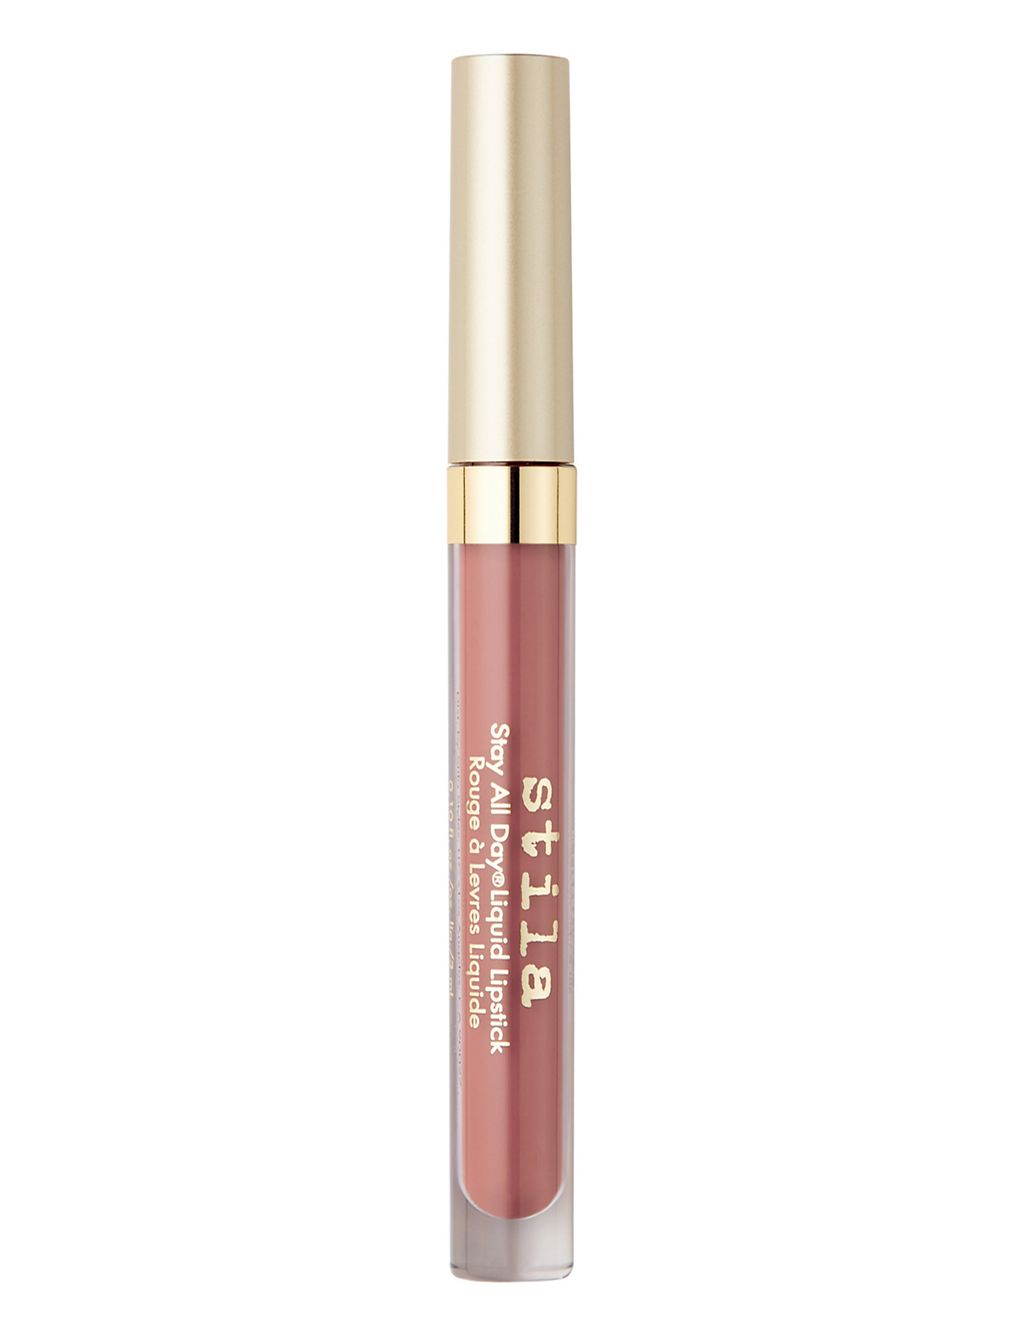 Stay All Day Sheer Liquid Lipstick 3 ml 3 of 3